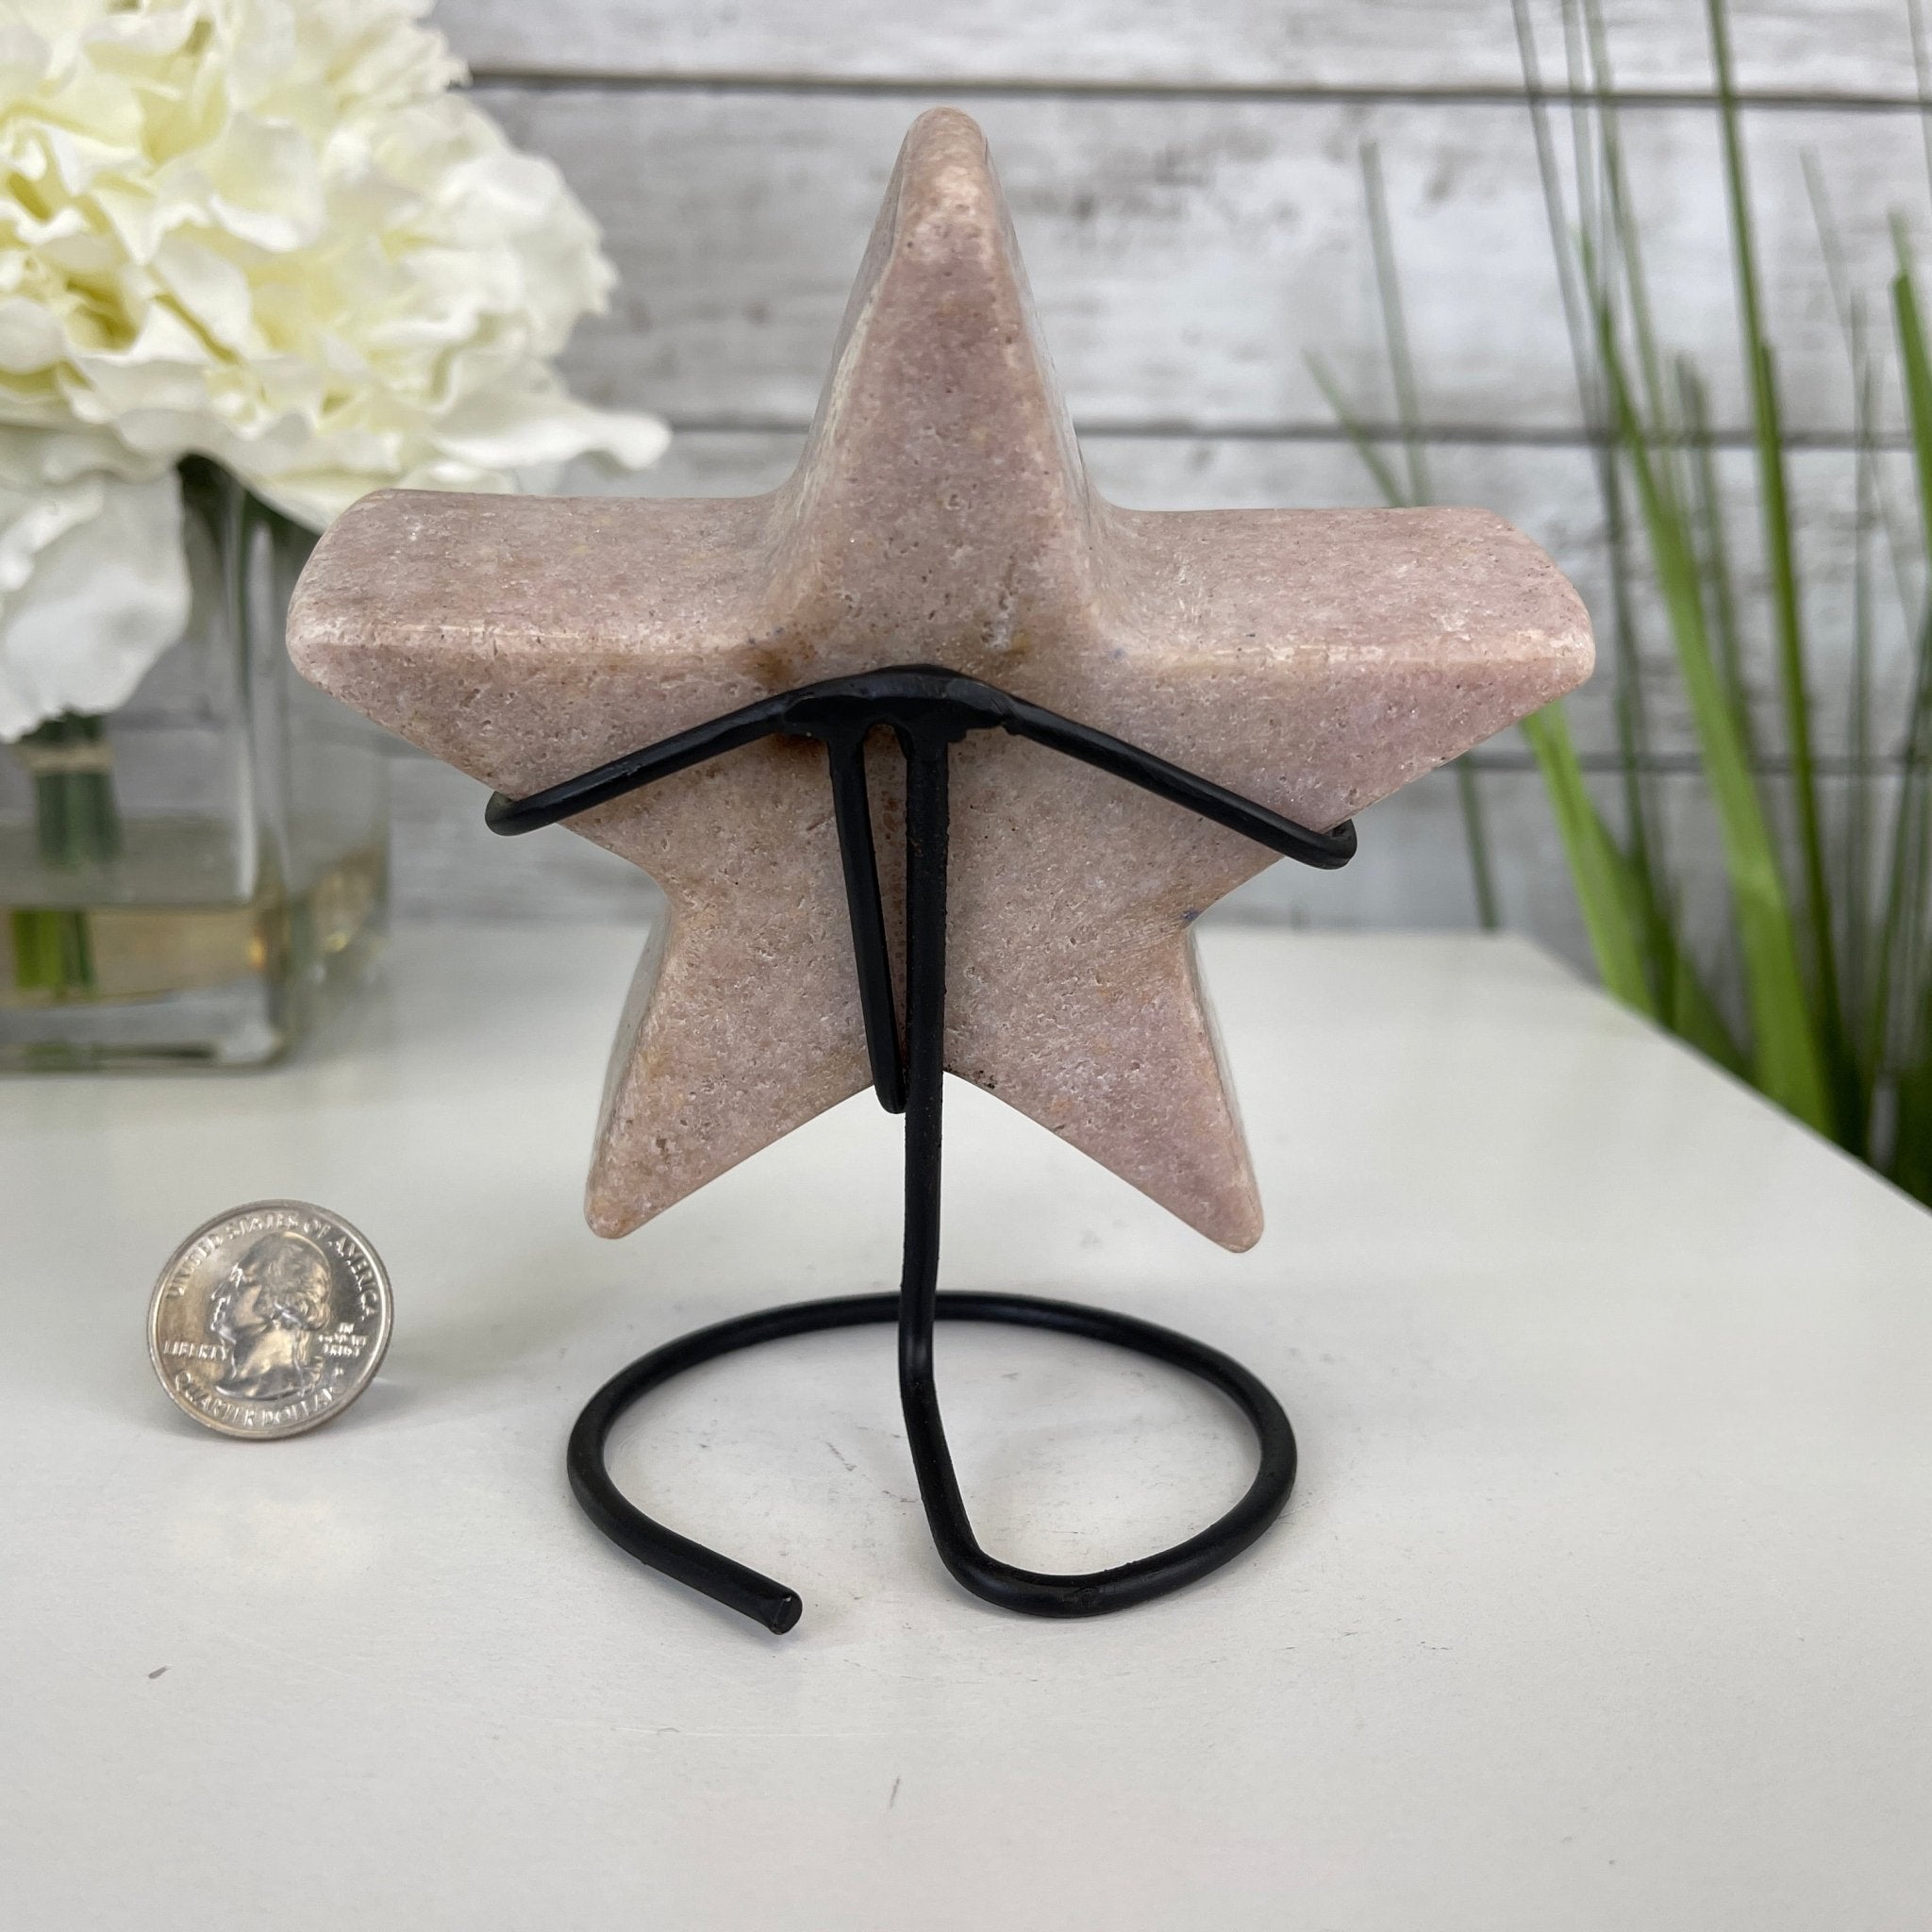 Pink Amethyst Star on a Metal Stand 5.25" Tall #5746-0002 by Brazil Gems - Brazil GemsBrazil GemsPink Amethyst Star on a Metal Stand 5.25" Tall #5746-0002 by Brazil GemsStars5746-0002